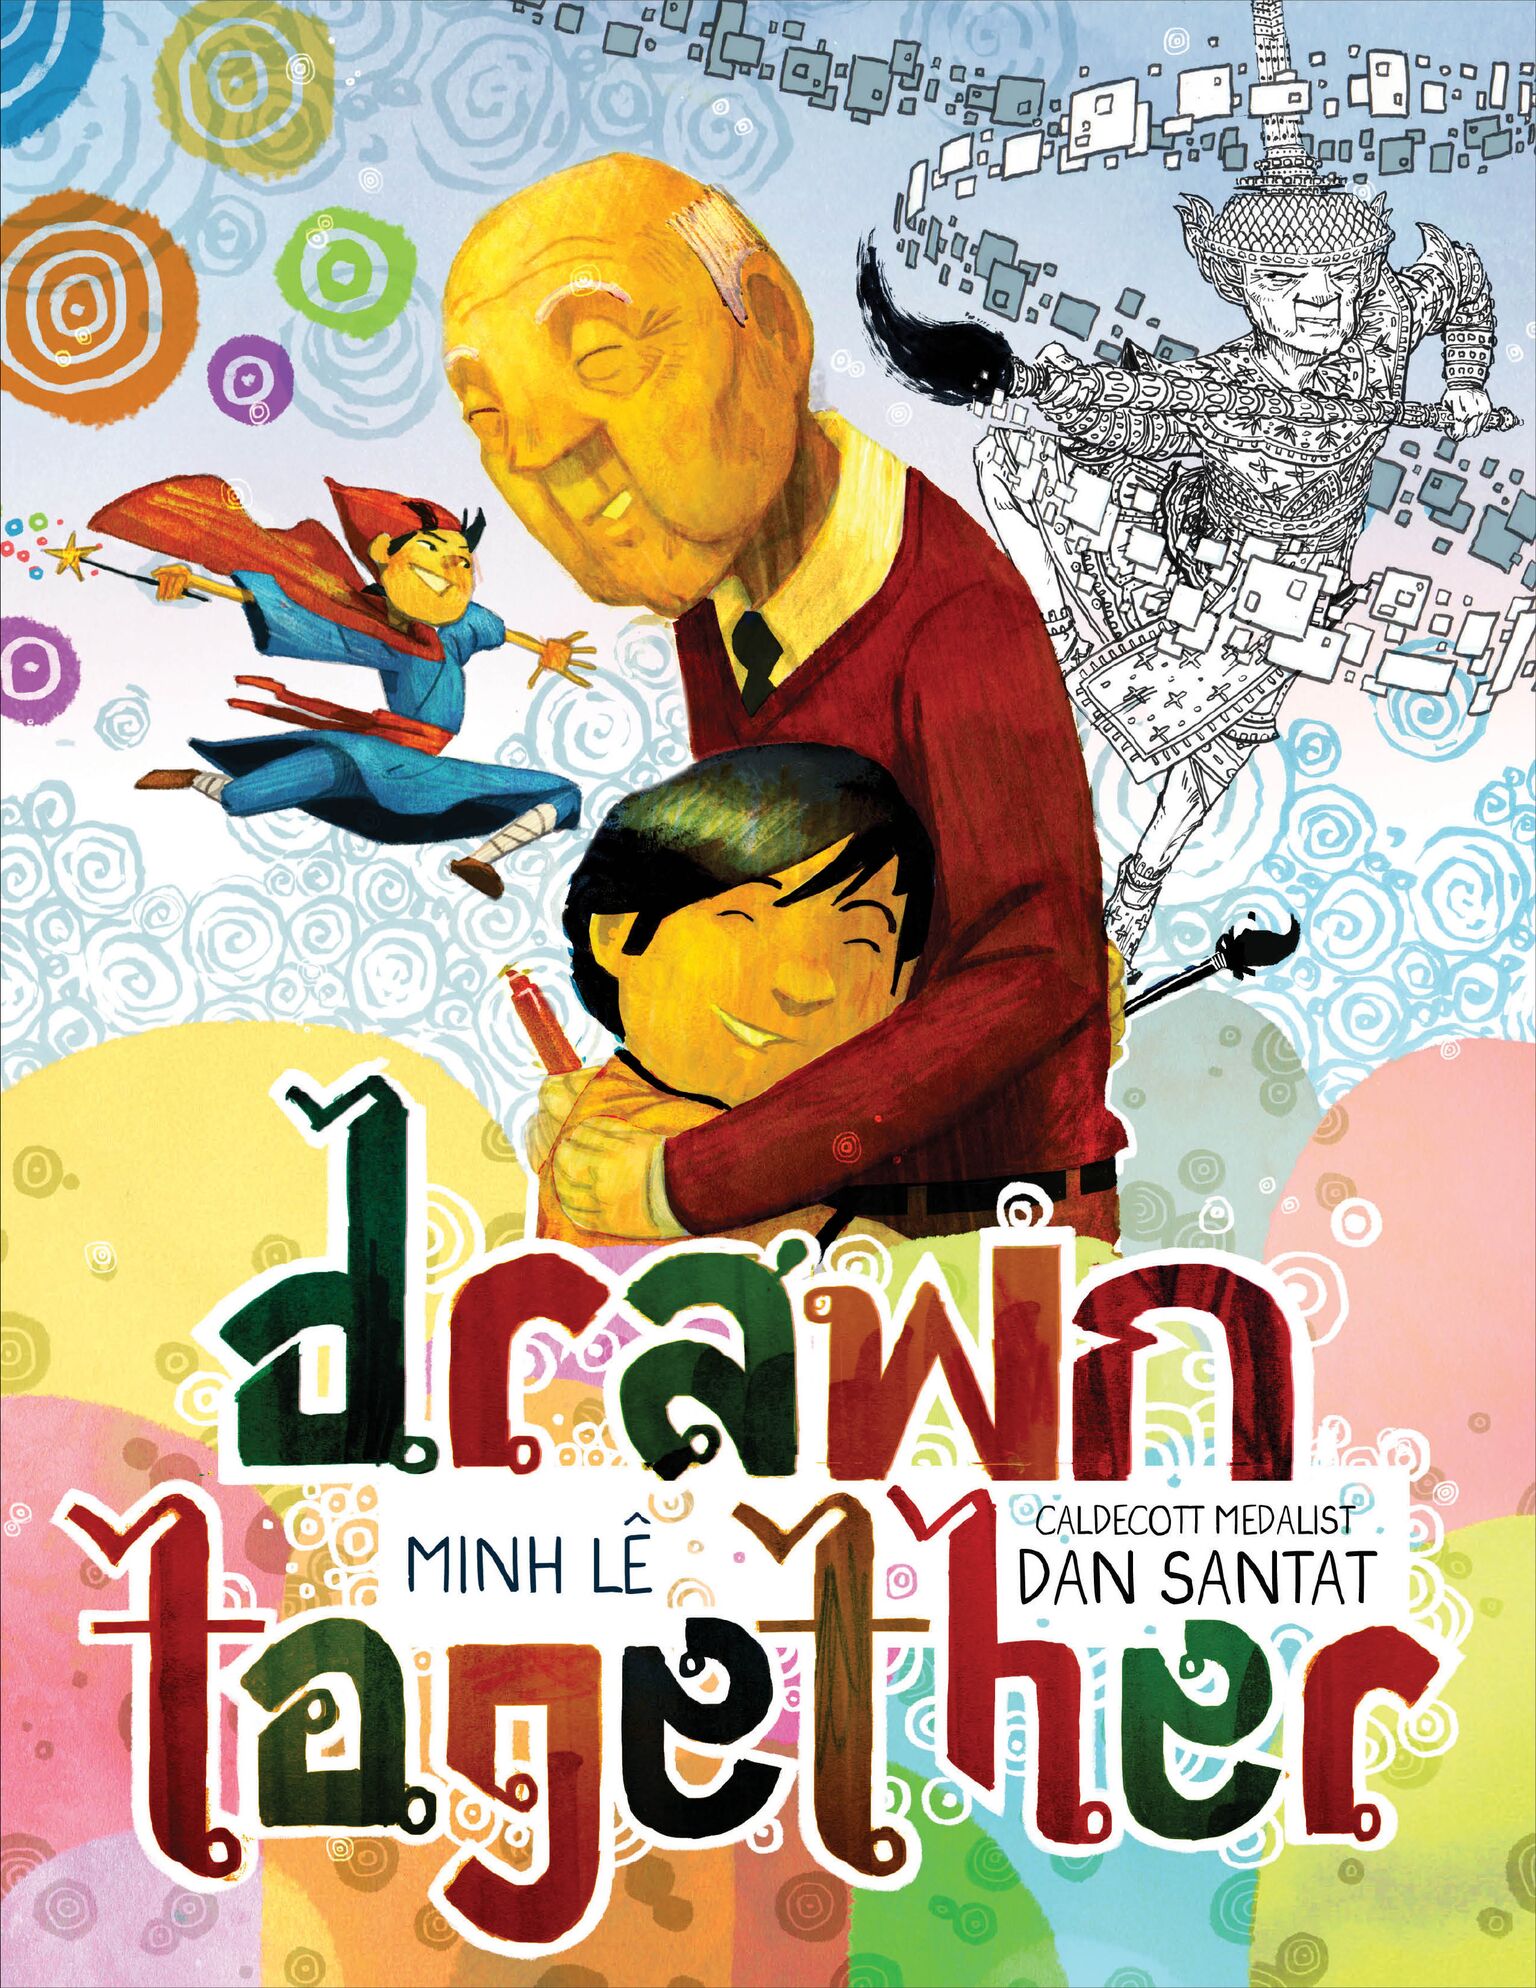 Drawn Together a Book Review and Giveaway